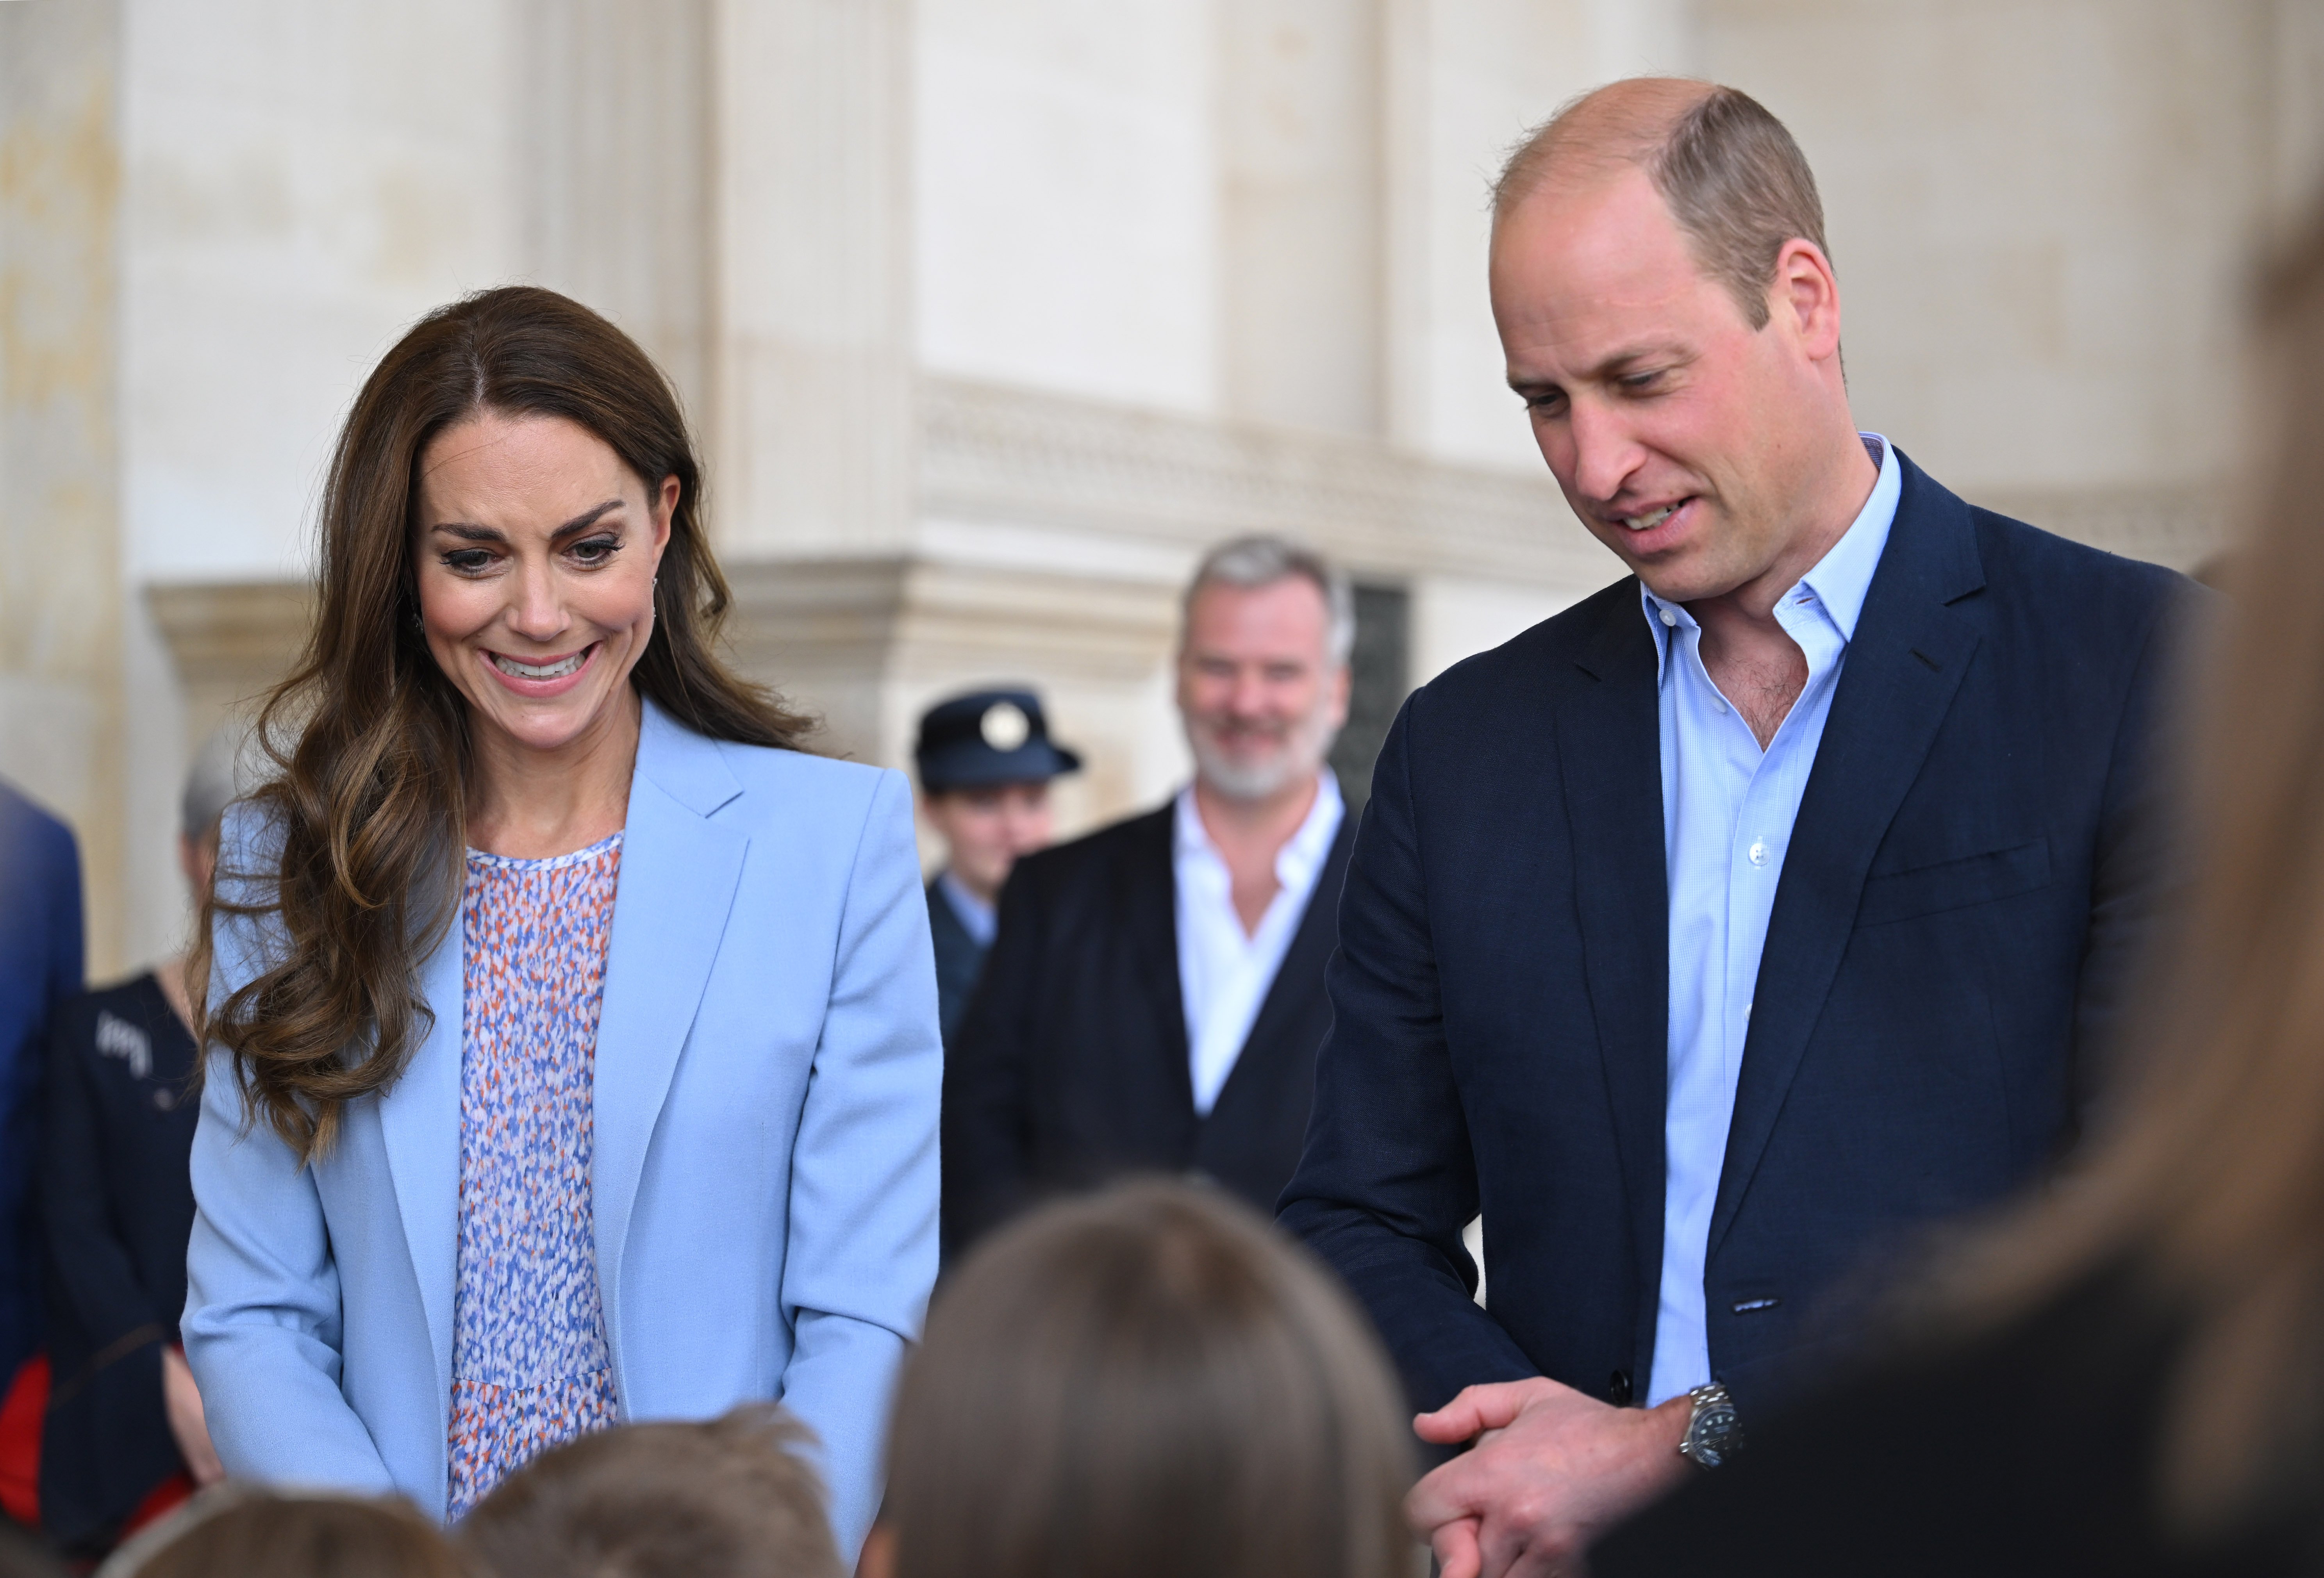 Catherine, Duchess of Cambridge and Prince William, Duke of Cambridge visit Fitzwilliam Museum during an official visit to Cambridgeshire on June 23, 2022 in Cambridge, England. | Source: Getty Images